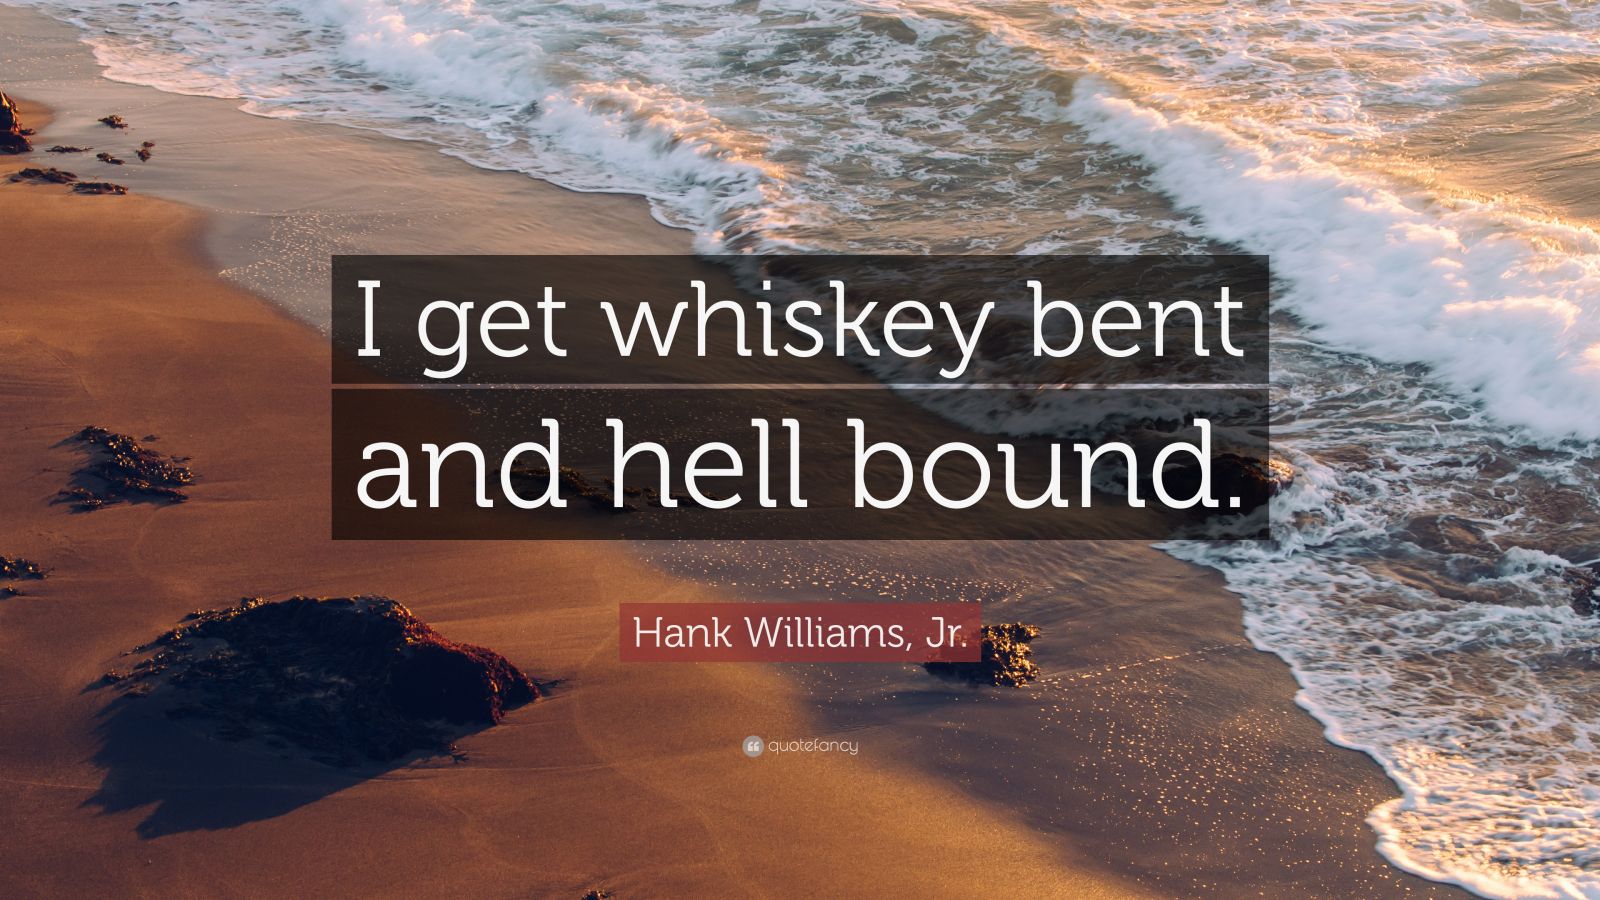 whiskey bent hell bound chords